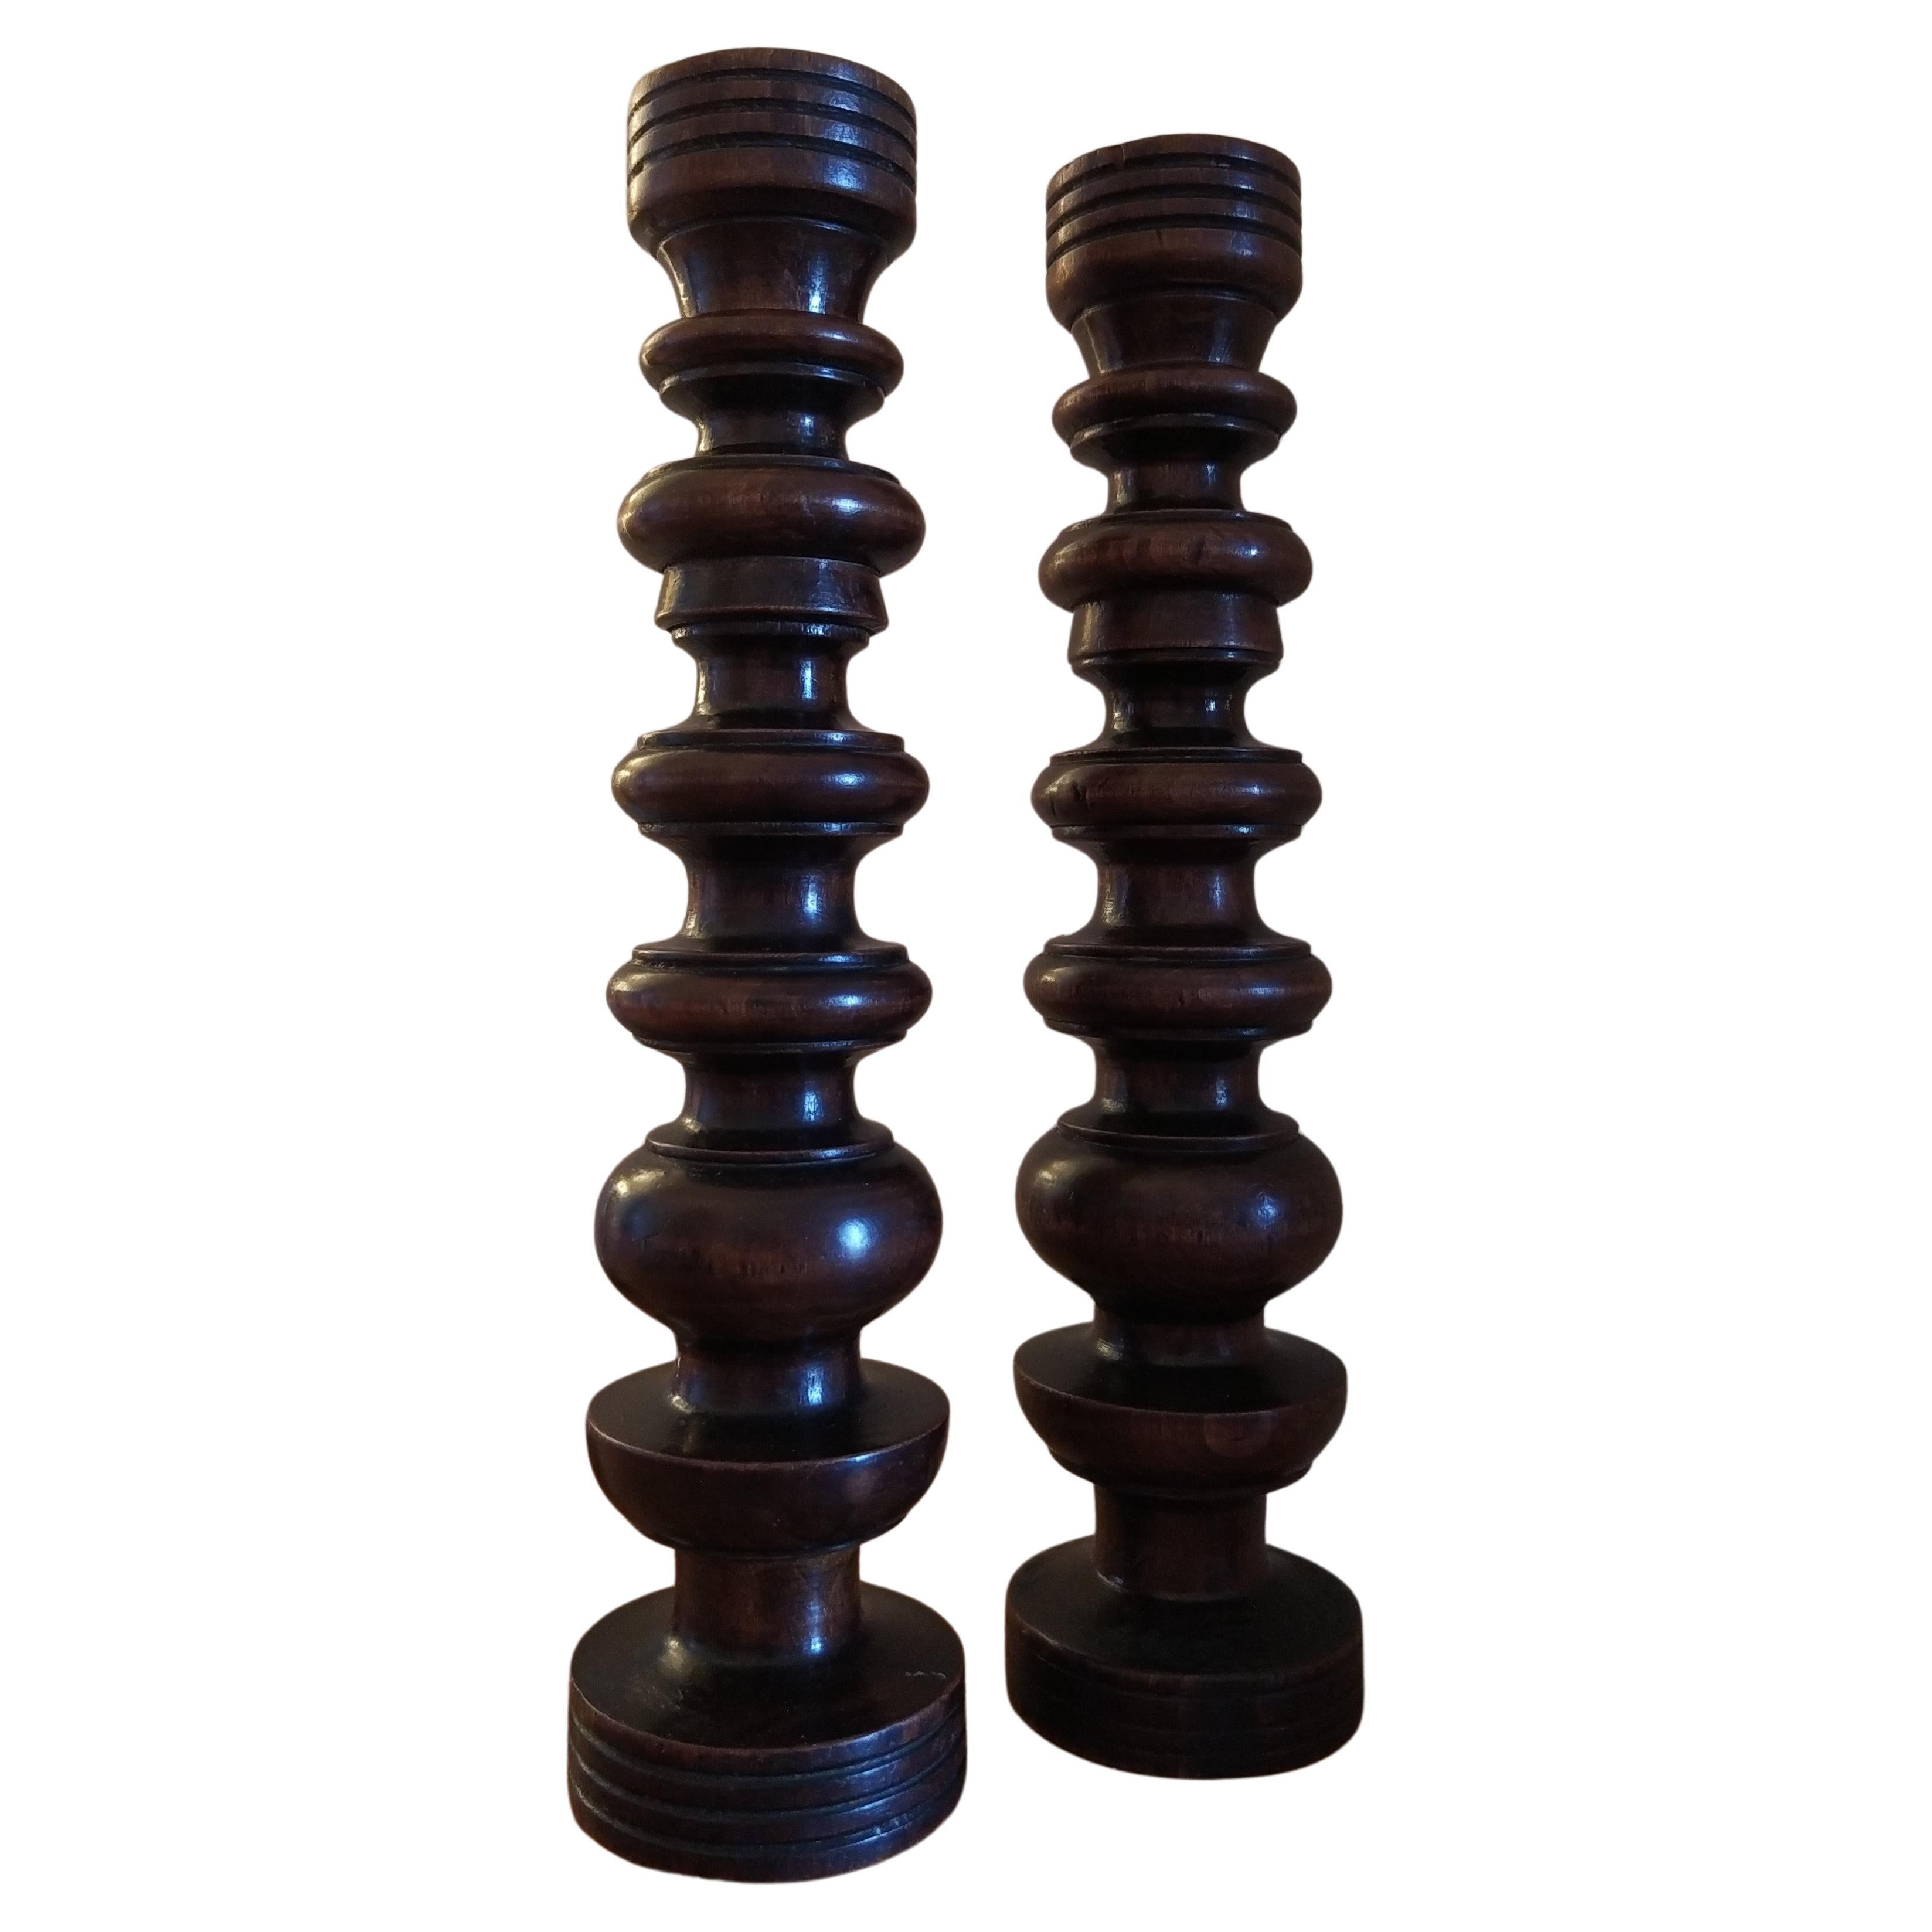 A fabulous pair of French turned walnut candlesticks dating from the early C20th, circa 1900-10.

These candlesticks would fit into a period or modern interior, they have a look of the mid century designer Robert Welch, albeit 50 to 60 years